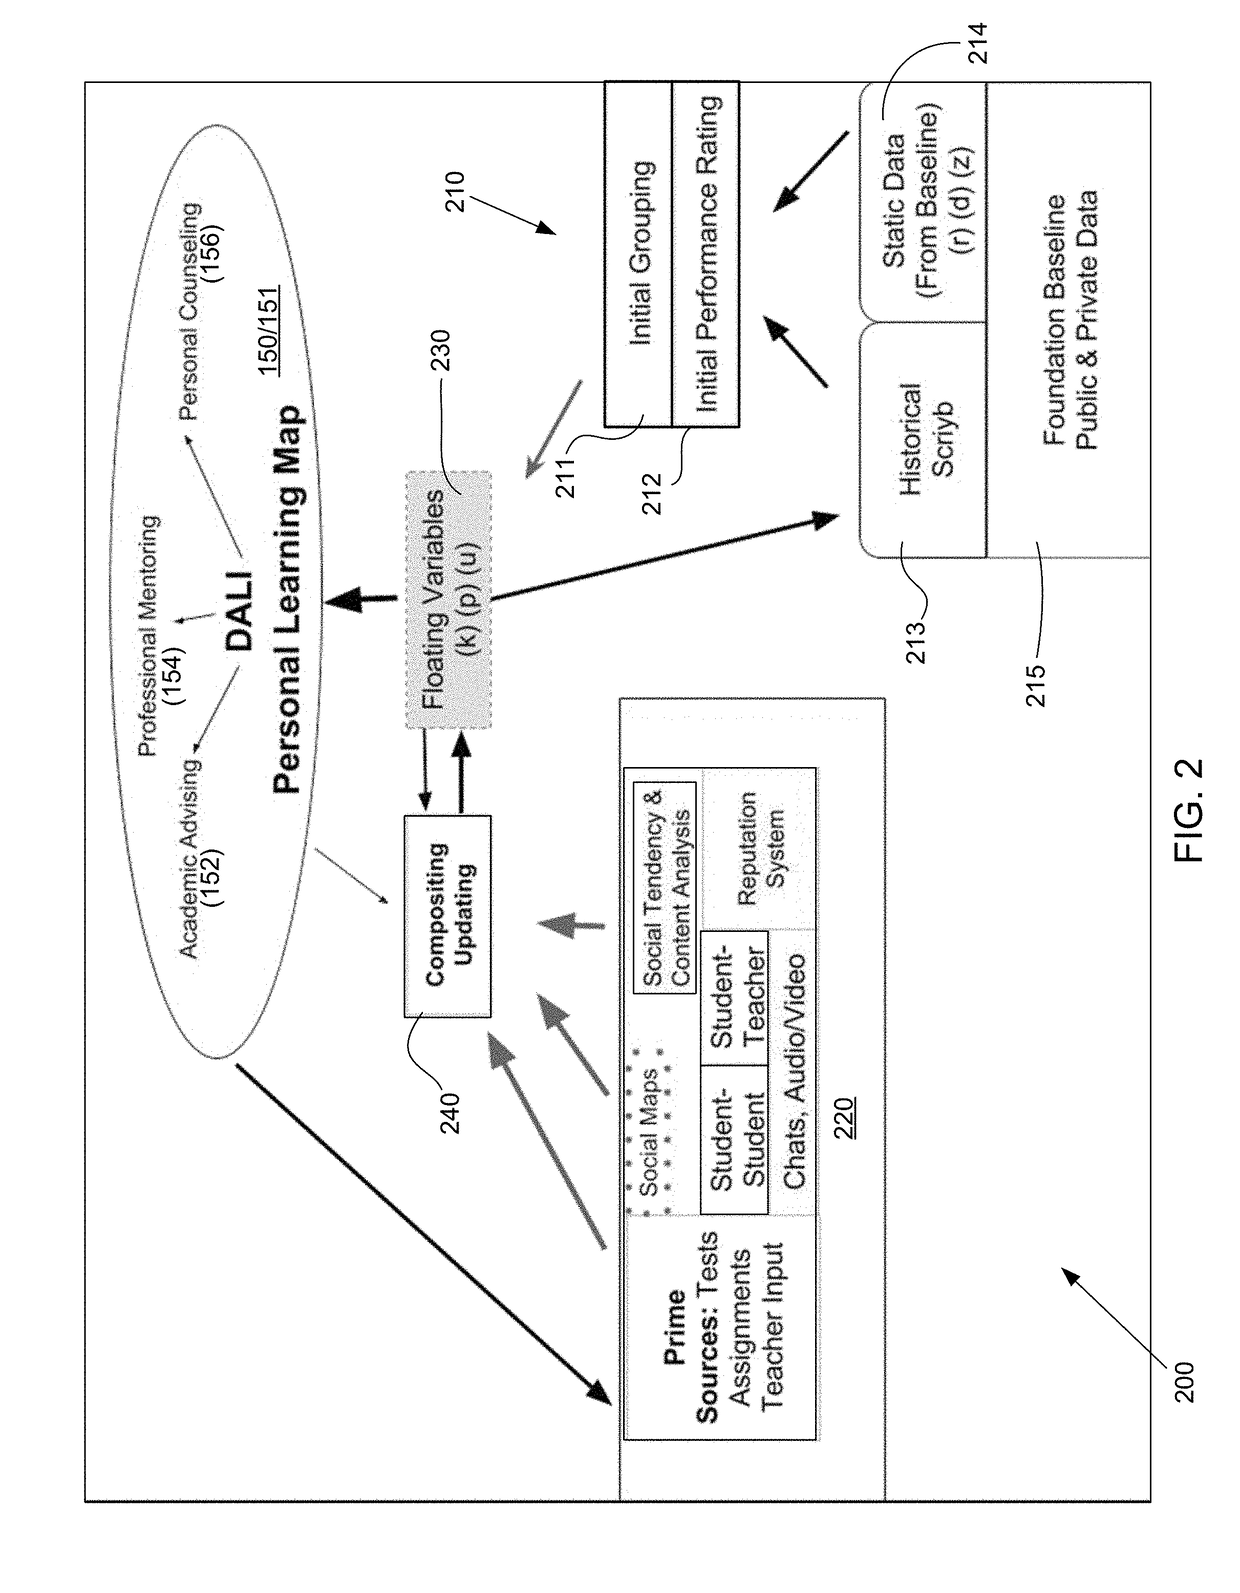 Artificial cognitive declarative-based memory model to dynamically store, retrieve, and recall data derived from aggregate datasets